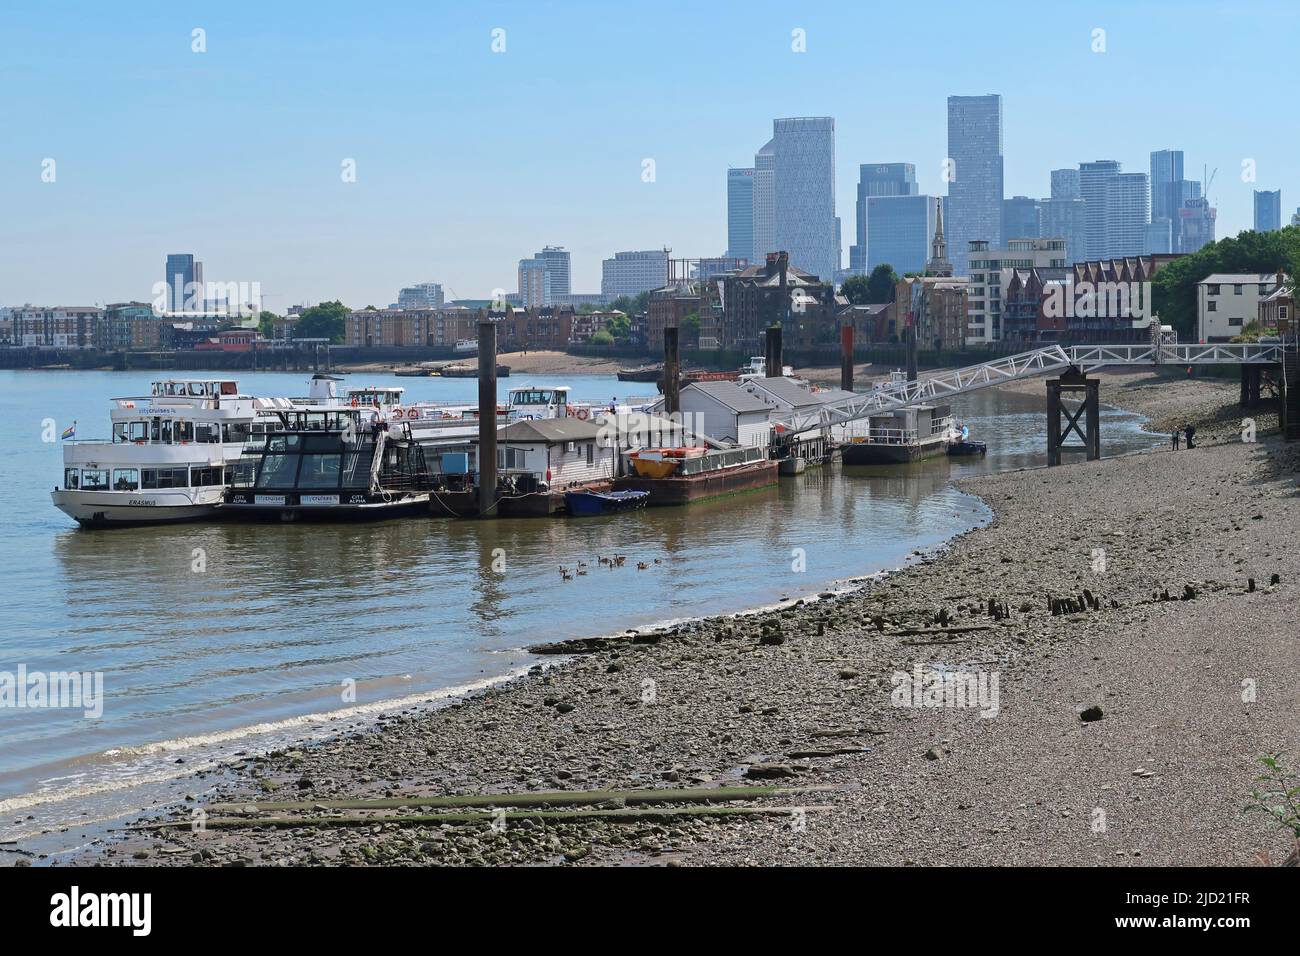 London, UK. River Thames sightseeing boats moored at a jetty at Bermondsey. Low tide reveals the foreshore. Towers of Canary Wharf in background. Stock Photo